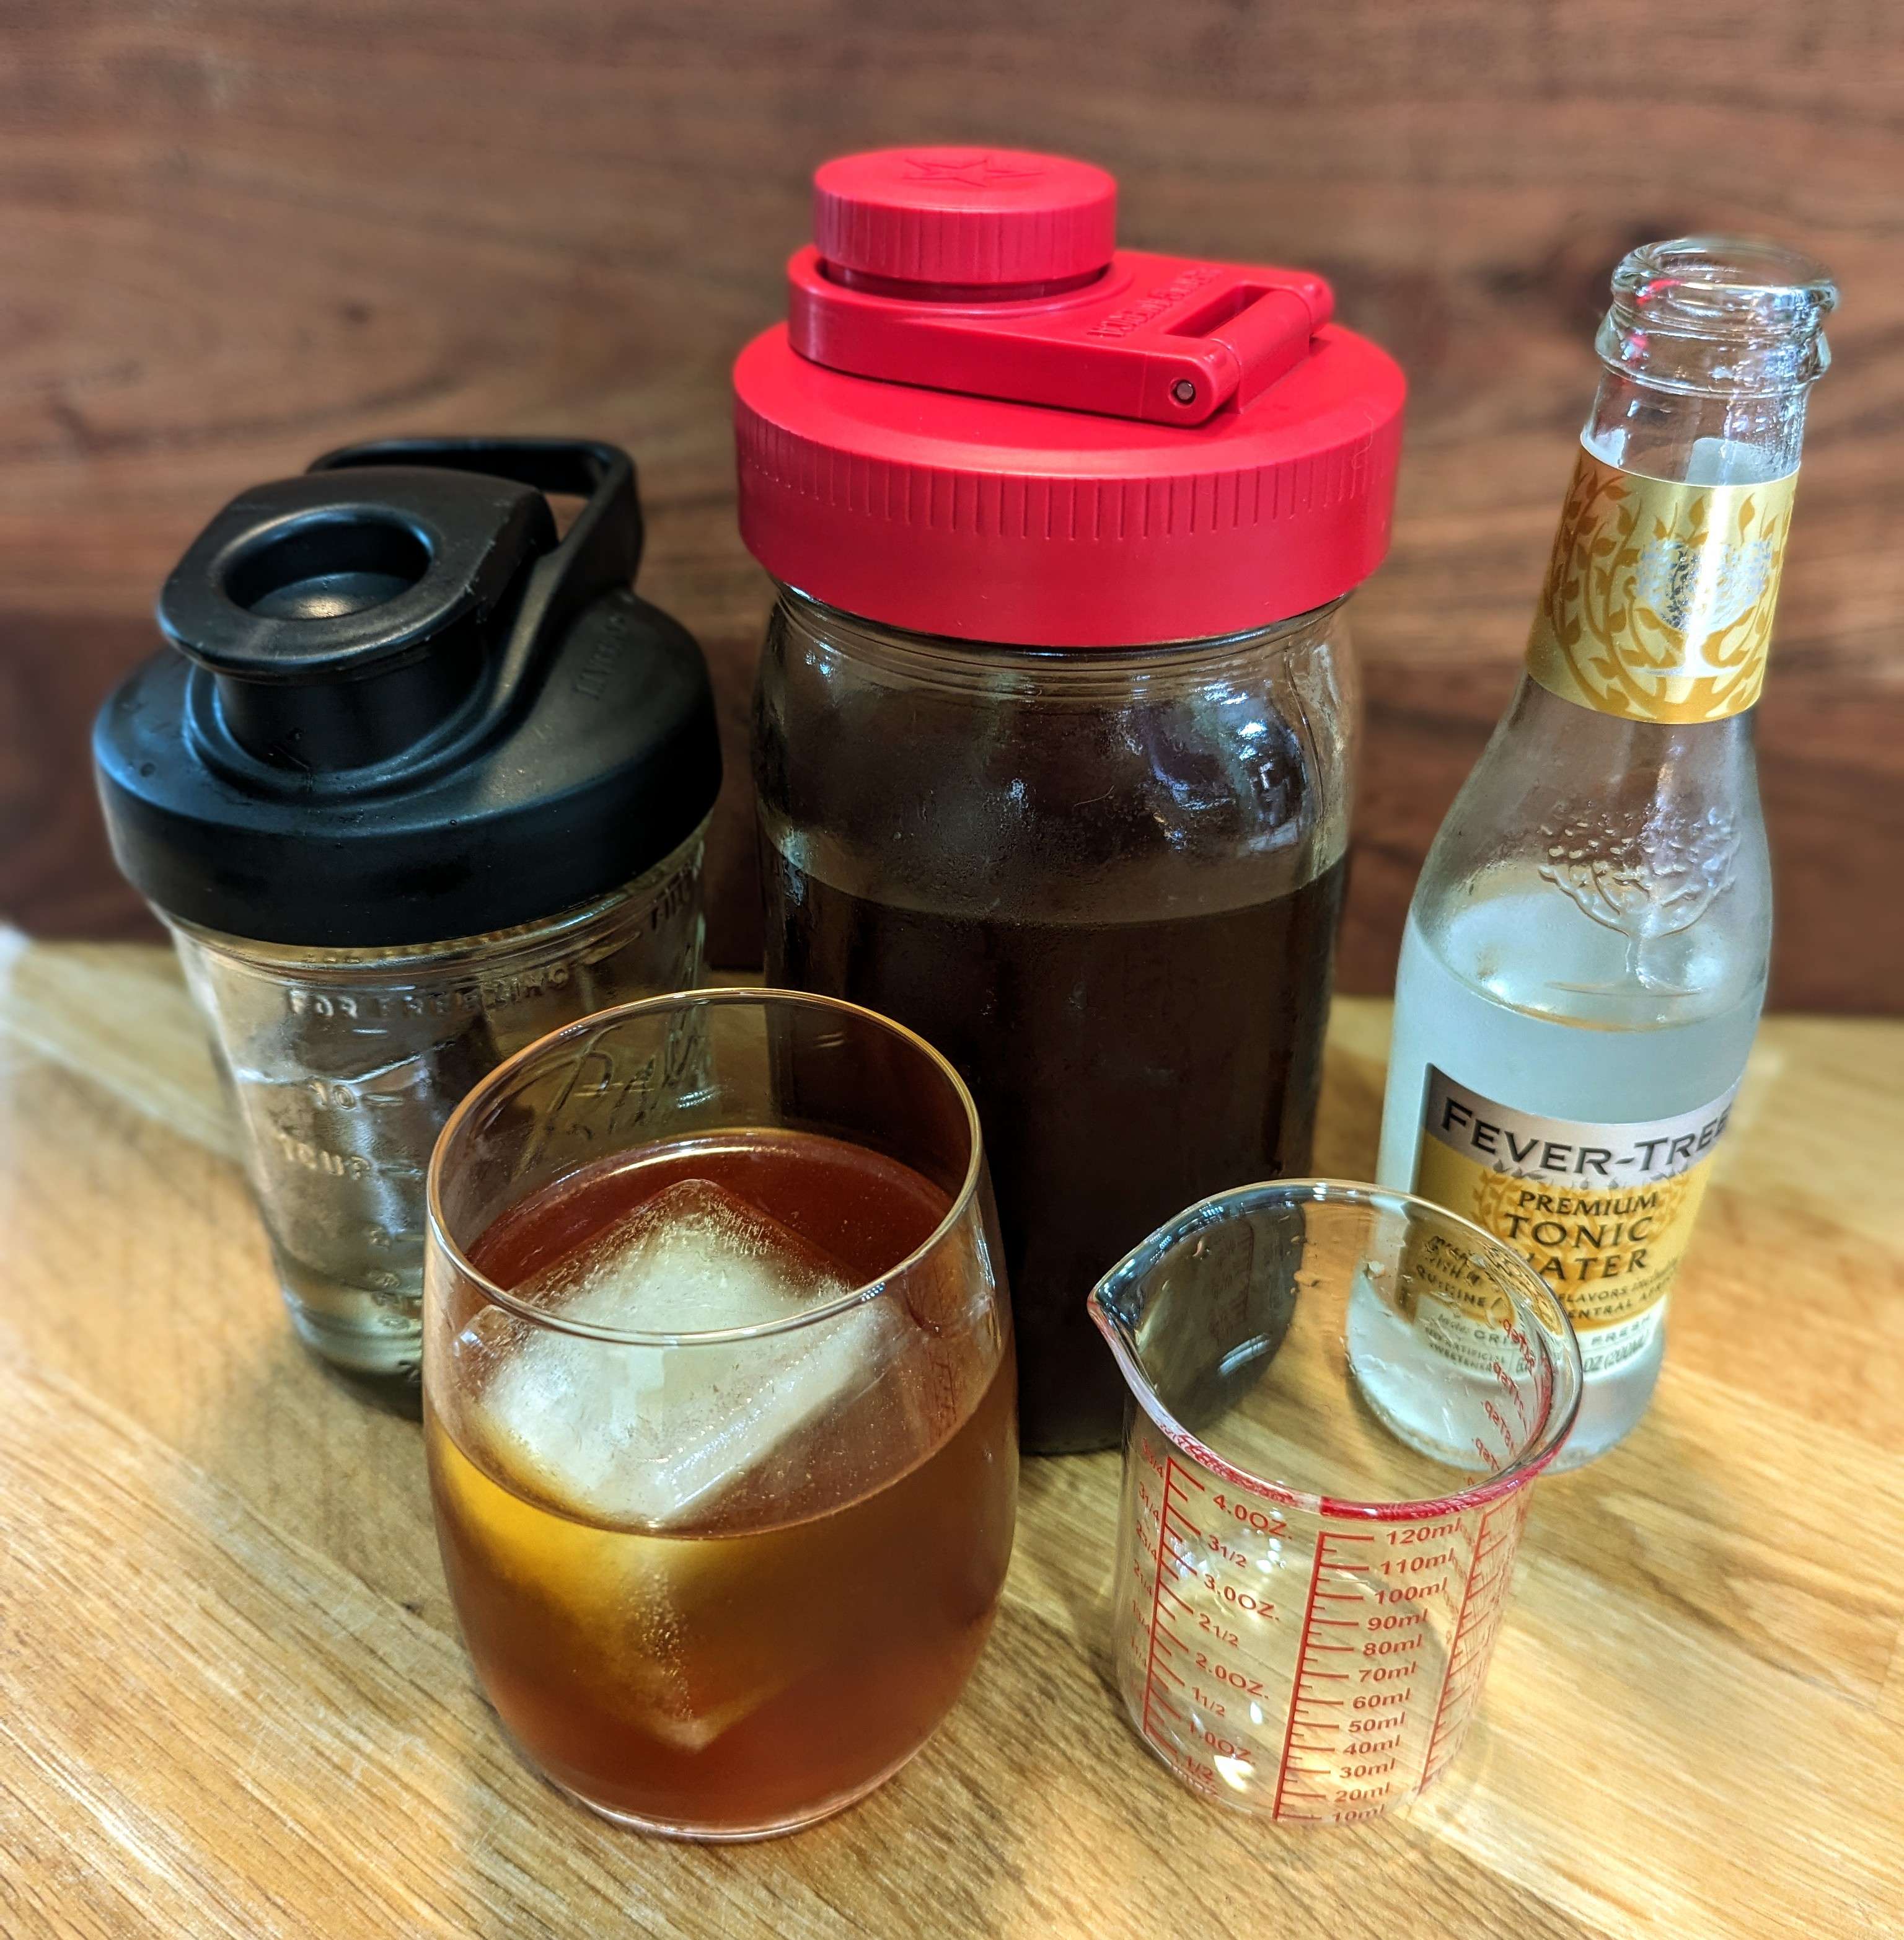 Coffee tonic ingredients: a 1-pint mason jar containing simple syrup, a 1-quart mason jar of cold brew coffee, a small bottle of Fever-Tree Tonic, and a glass of prepared coffee tonic with ice.